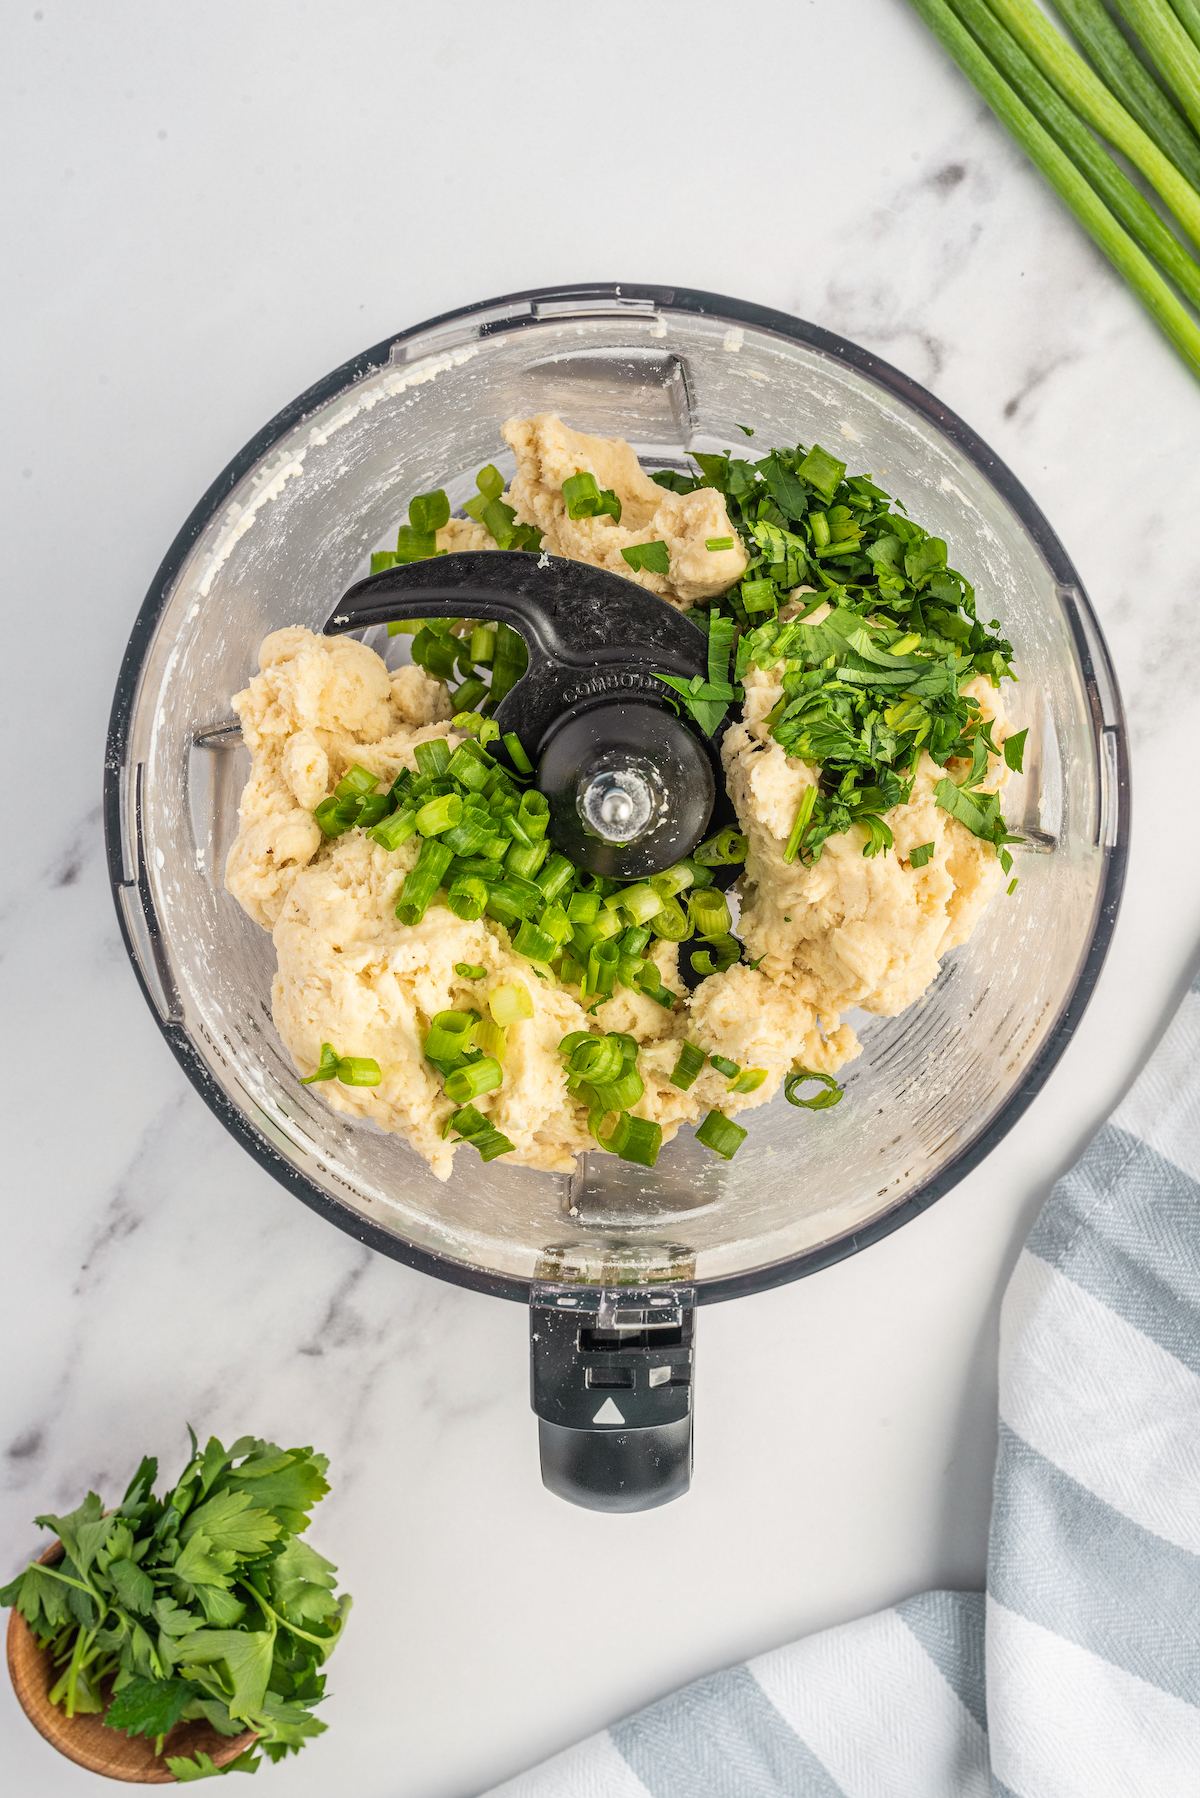 Biscuit dough with parsley and green onions in a food processor.